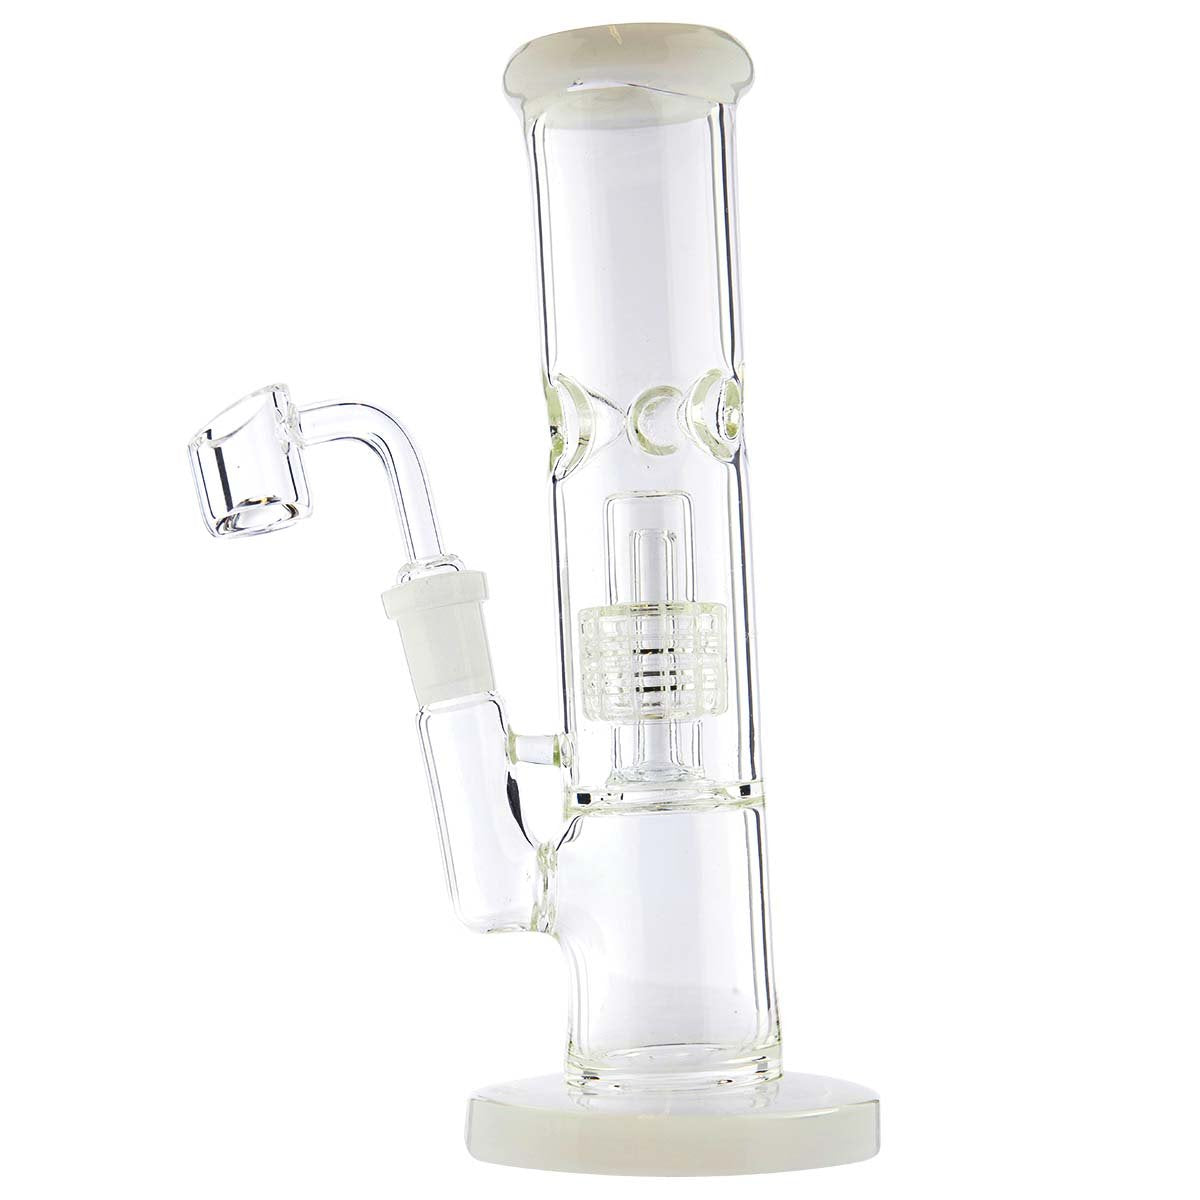 Waterpipe G/g Conical Showerhead 8 14Mm Female With Bowl And Banger White